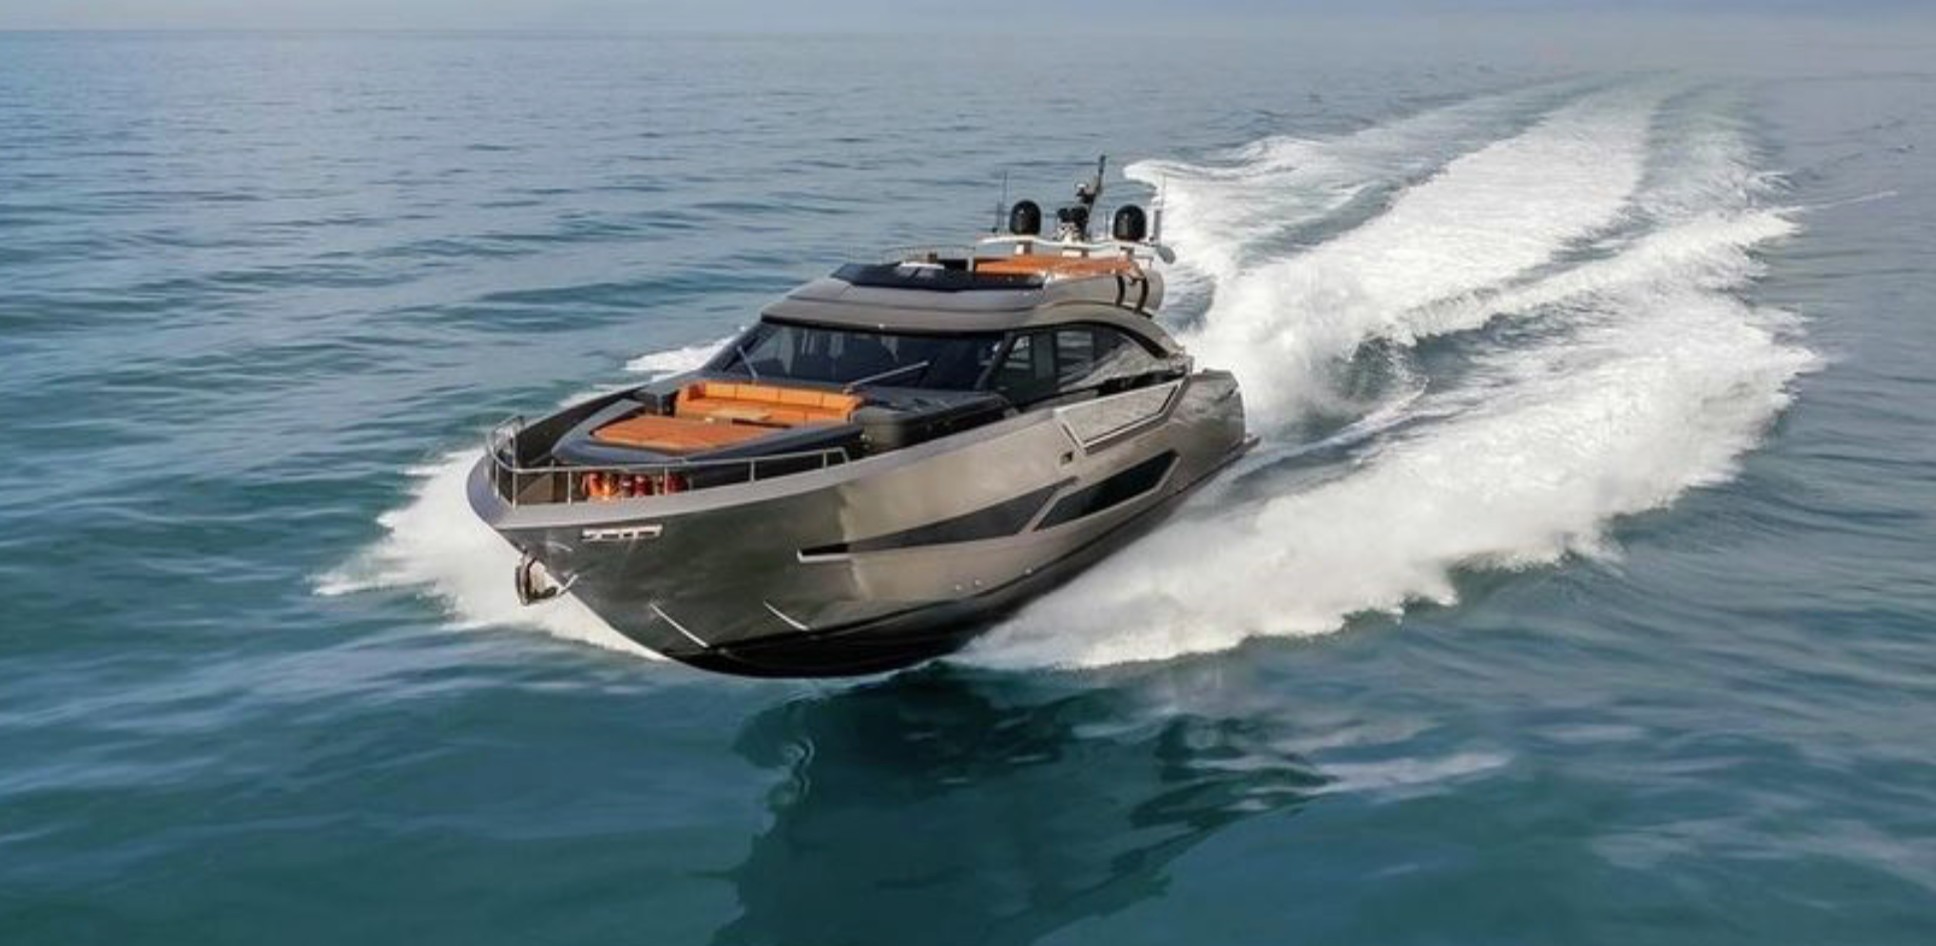 this fresh 11 million luxury toy hits the waves at more than 65 mph 10